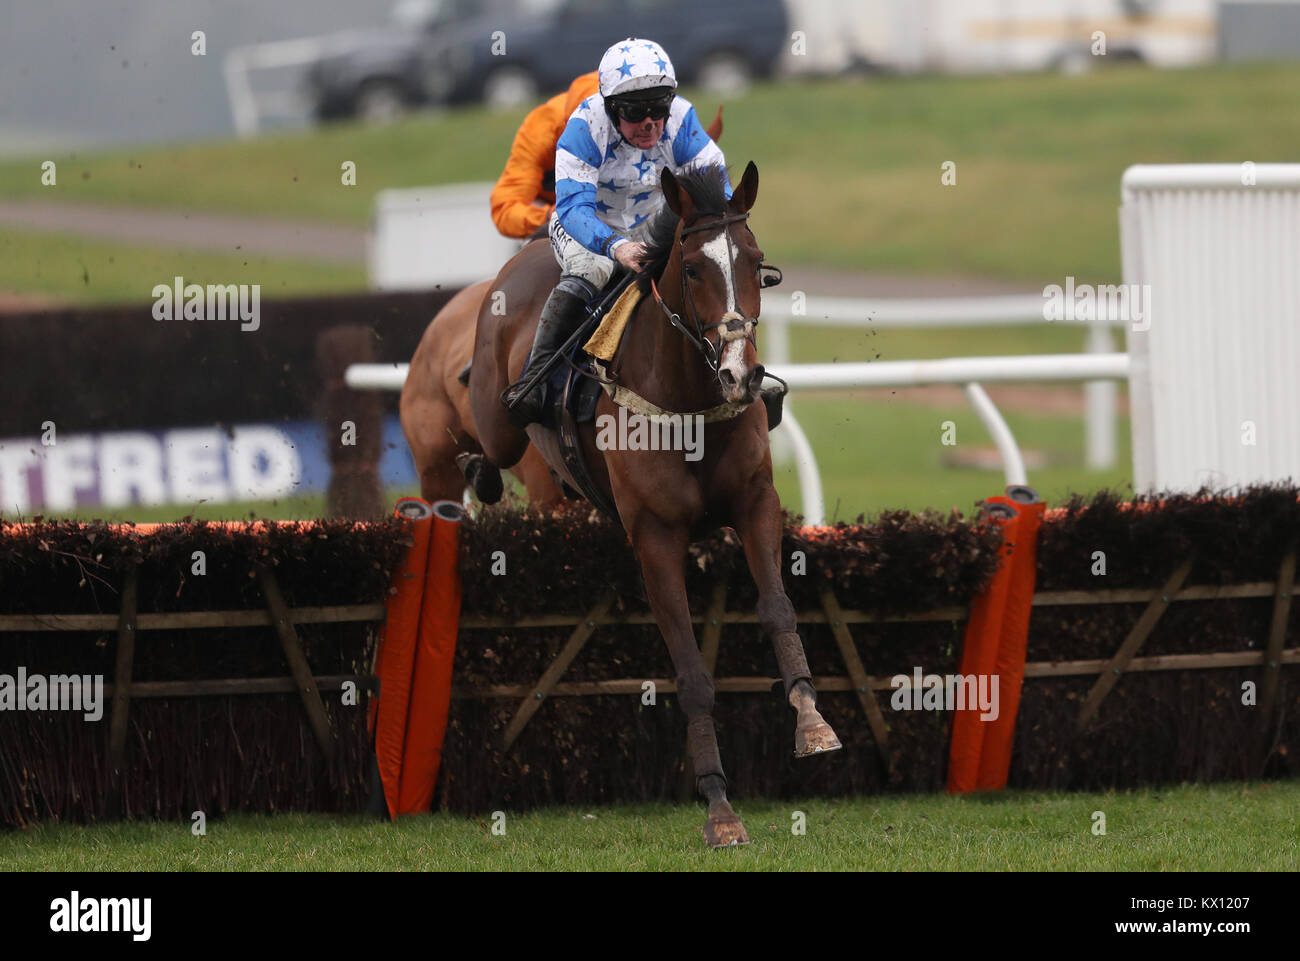 Diablo De Rouhet ridden by Mark Grant on their way to victory in the Coral Download The App Maiden Hurdle during Coral Welsh Grand National Day at Chepstow Racecourse, Chepstow. Stock Photo